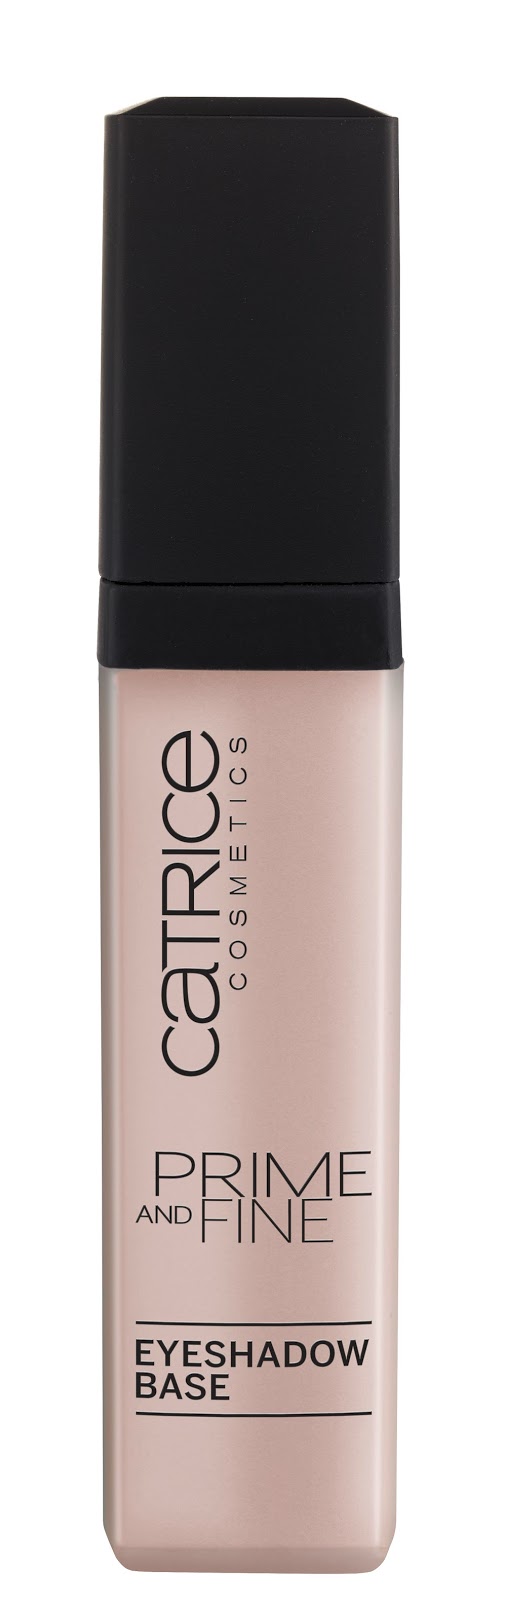 Catrice - Prime And Fine Eyeshadow Base